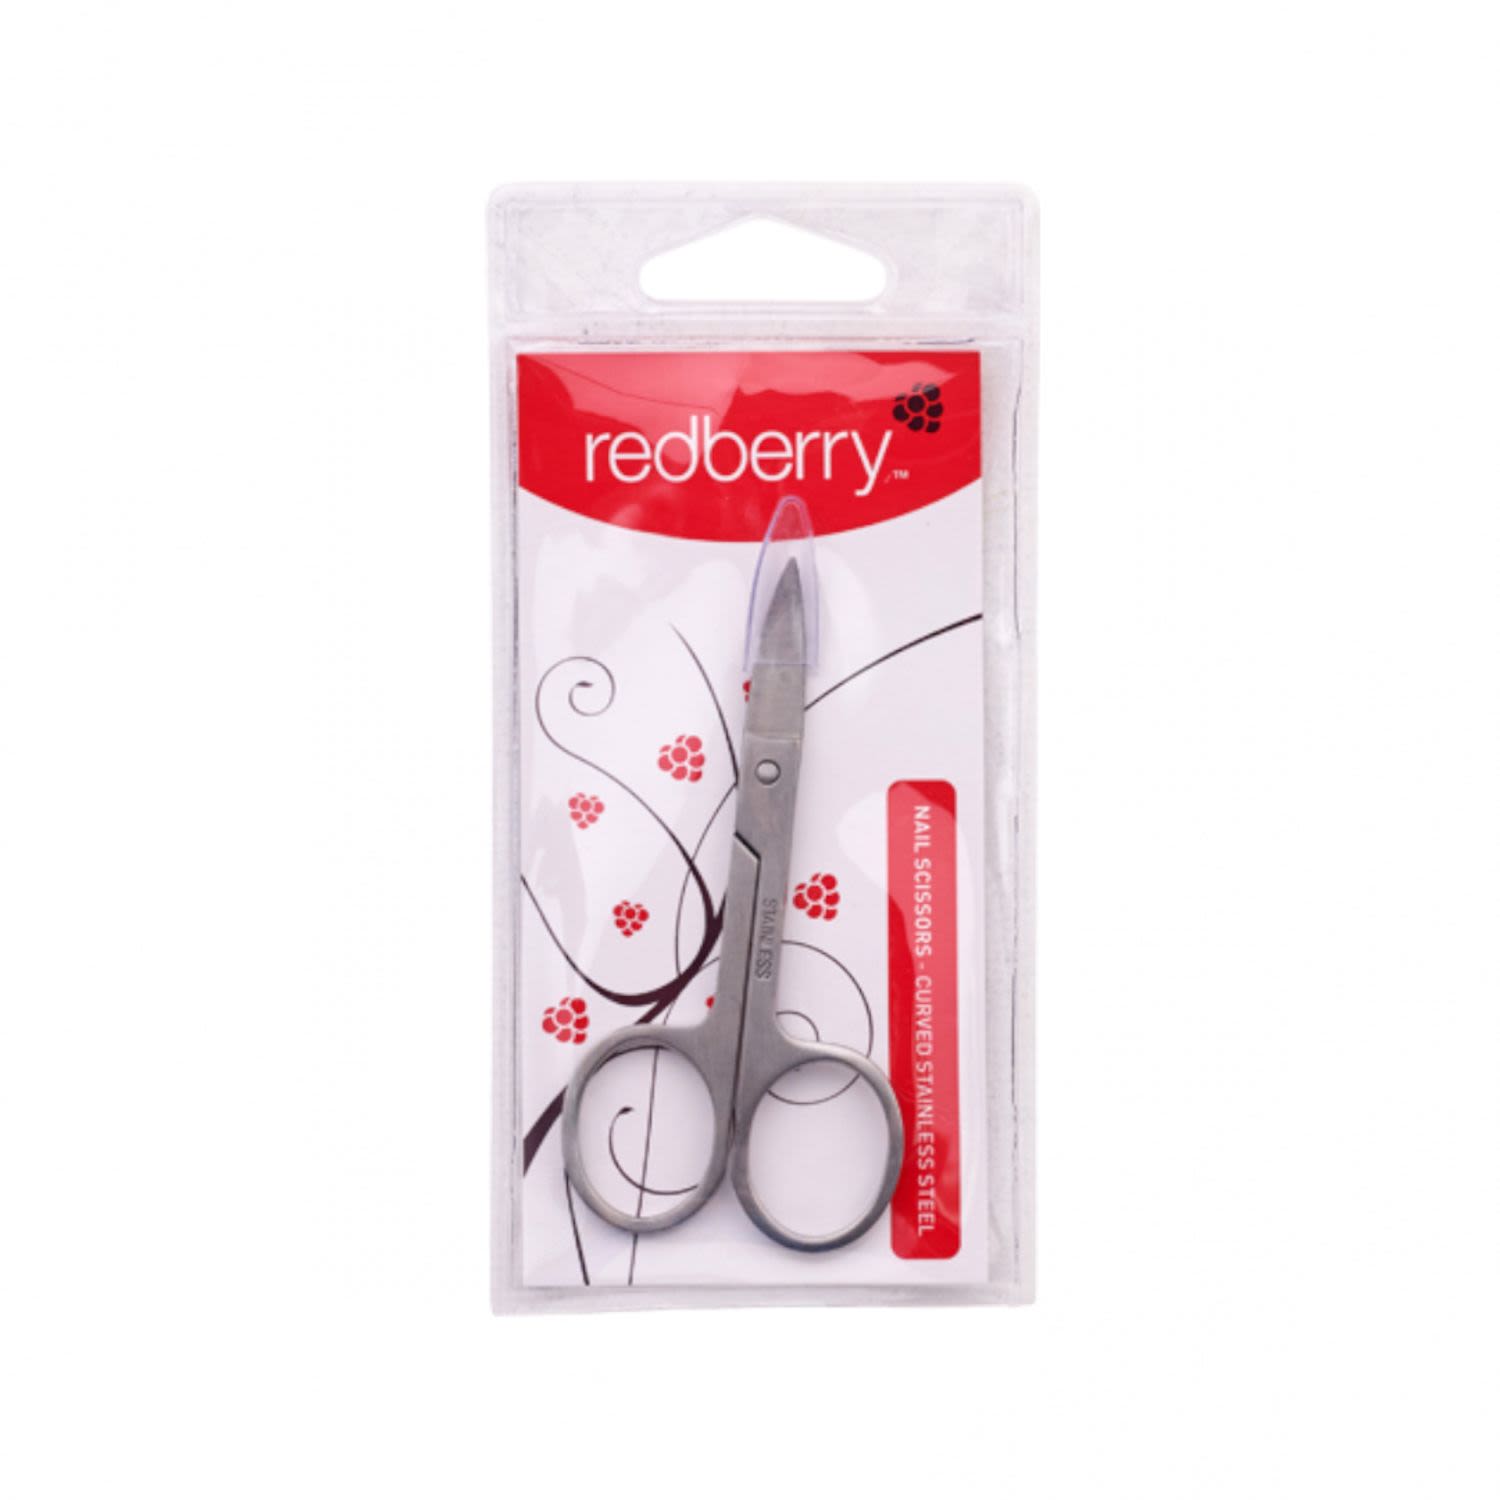 Redberry Nail Scissors Curved, 1 Each